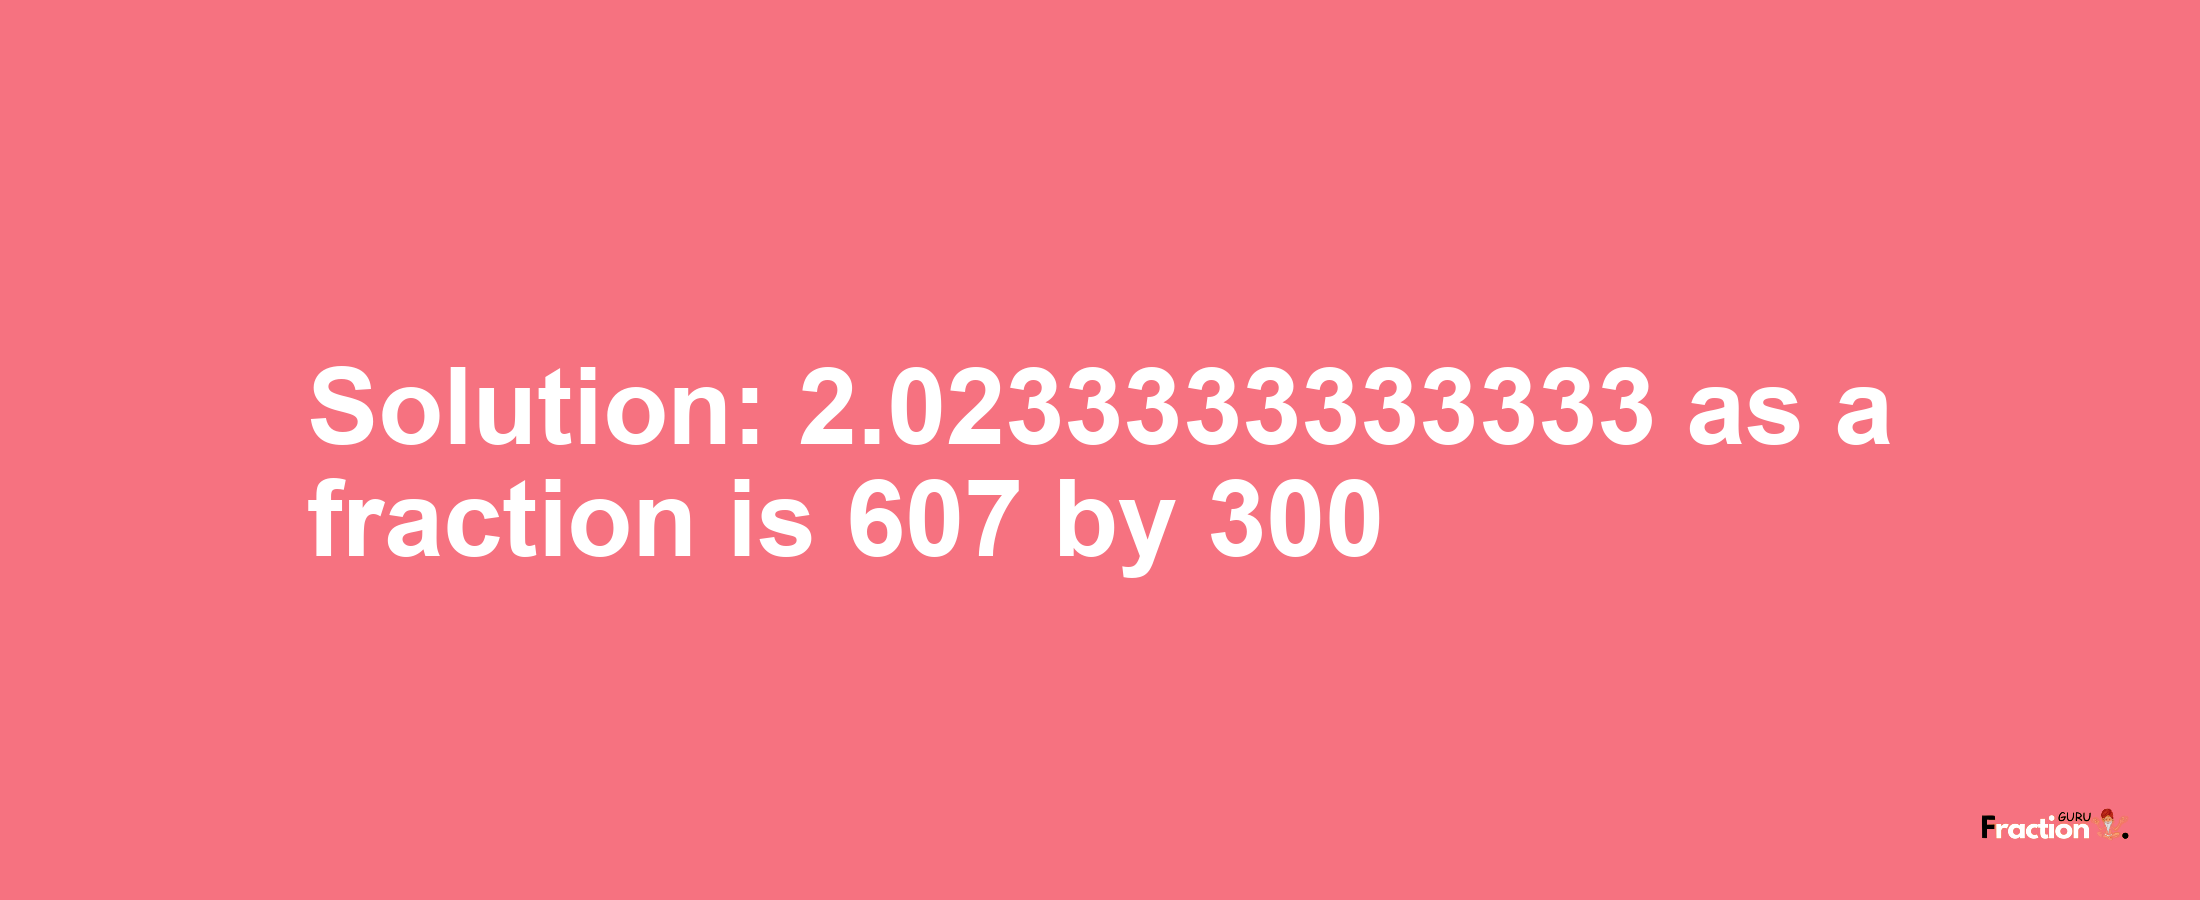 Solution:2.0233333333333 as a fraction is 607/300